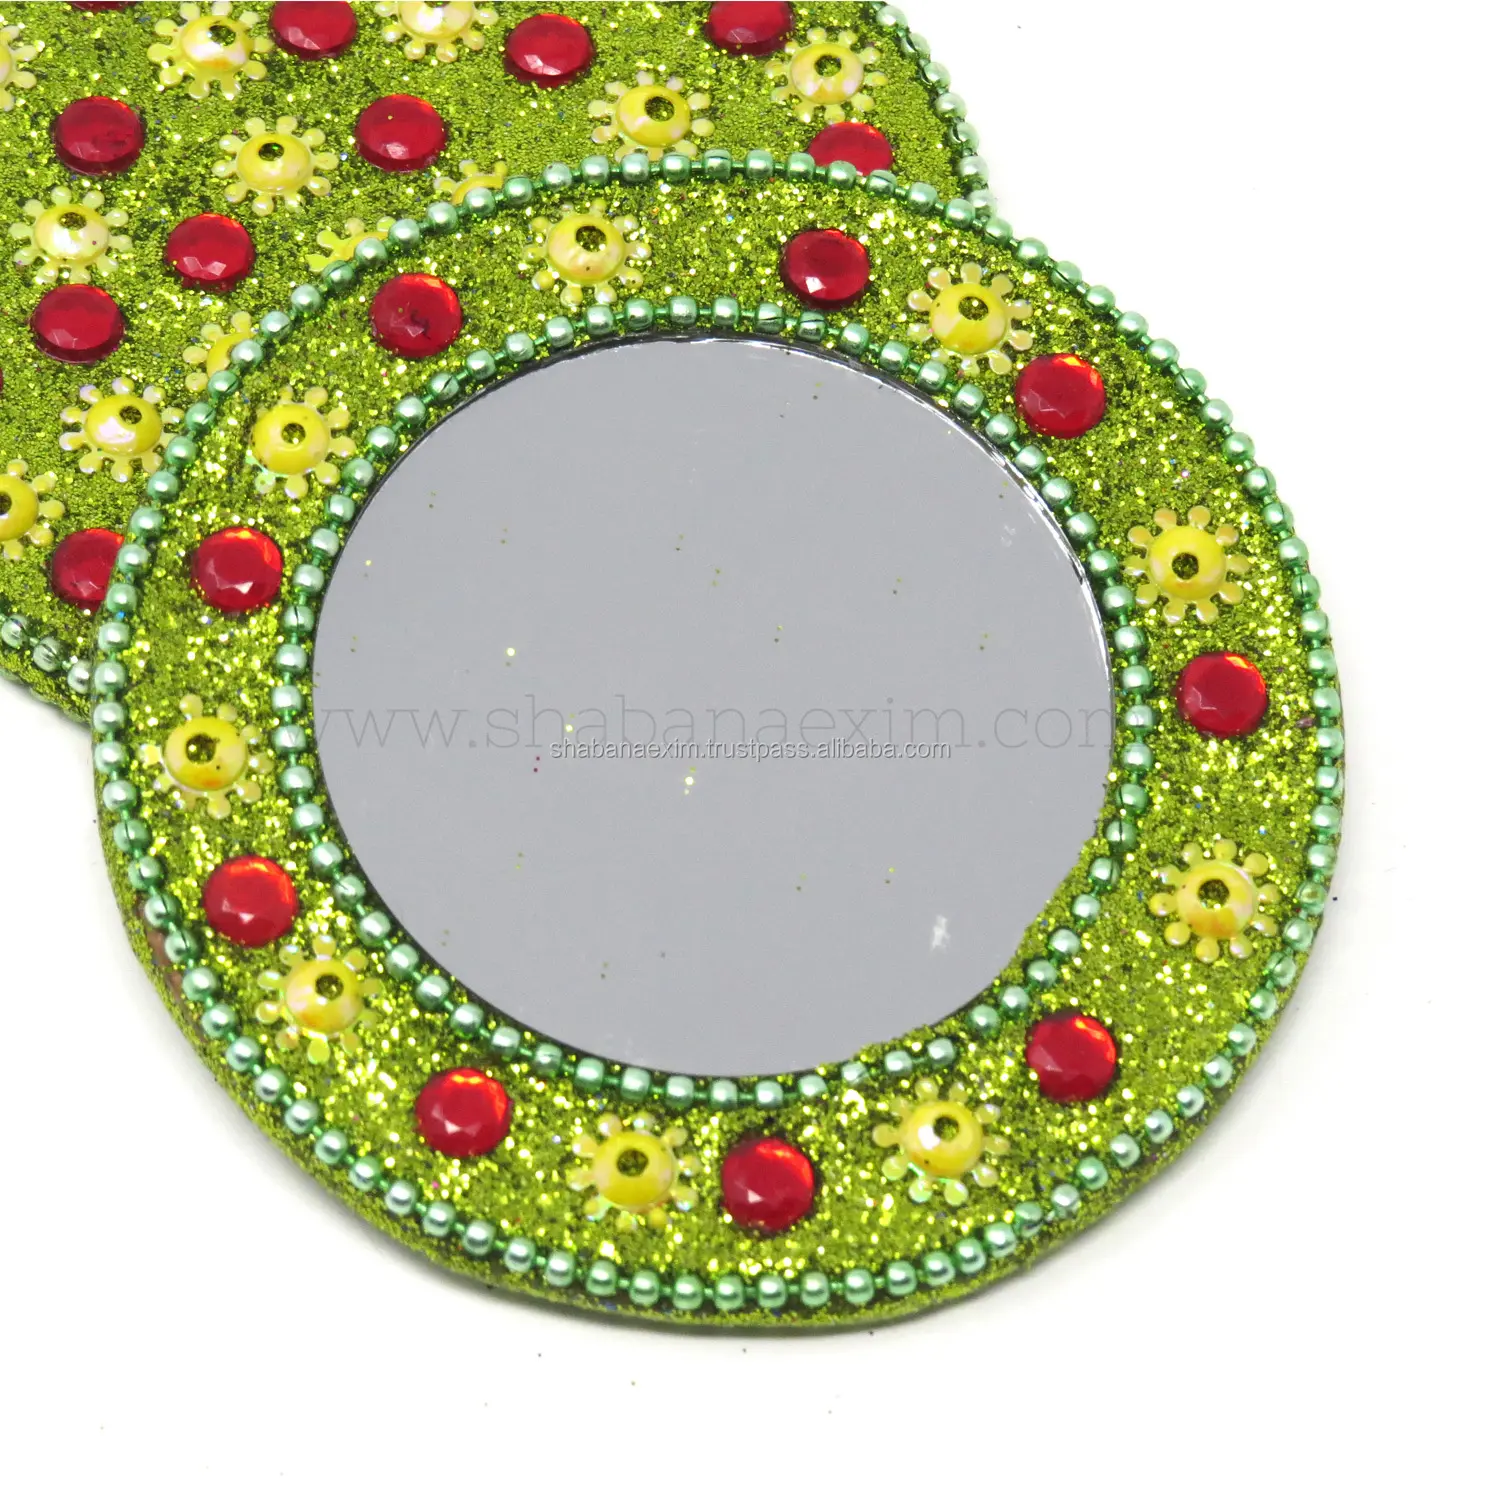 Round Travel Mirror Fashionable Cosmetic Indian Handmade Lac Mirror